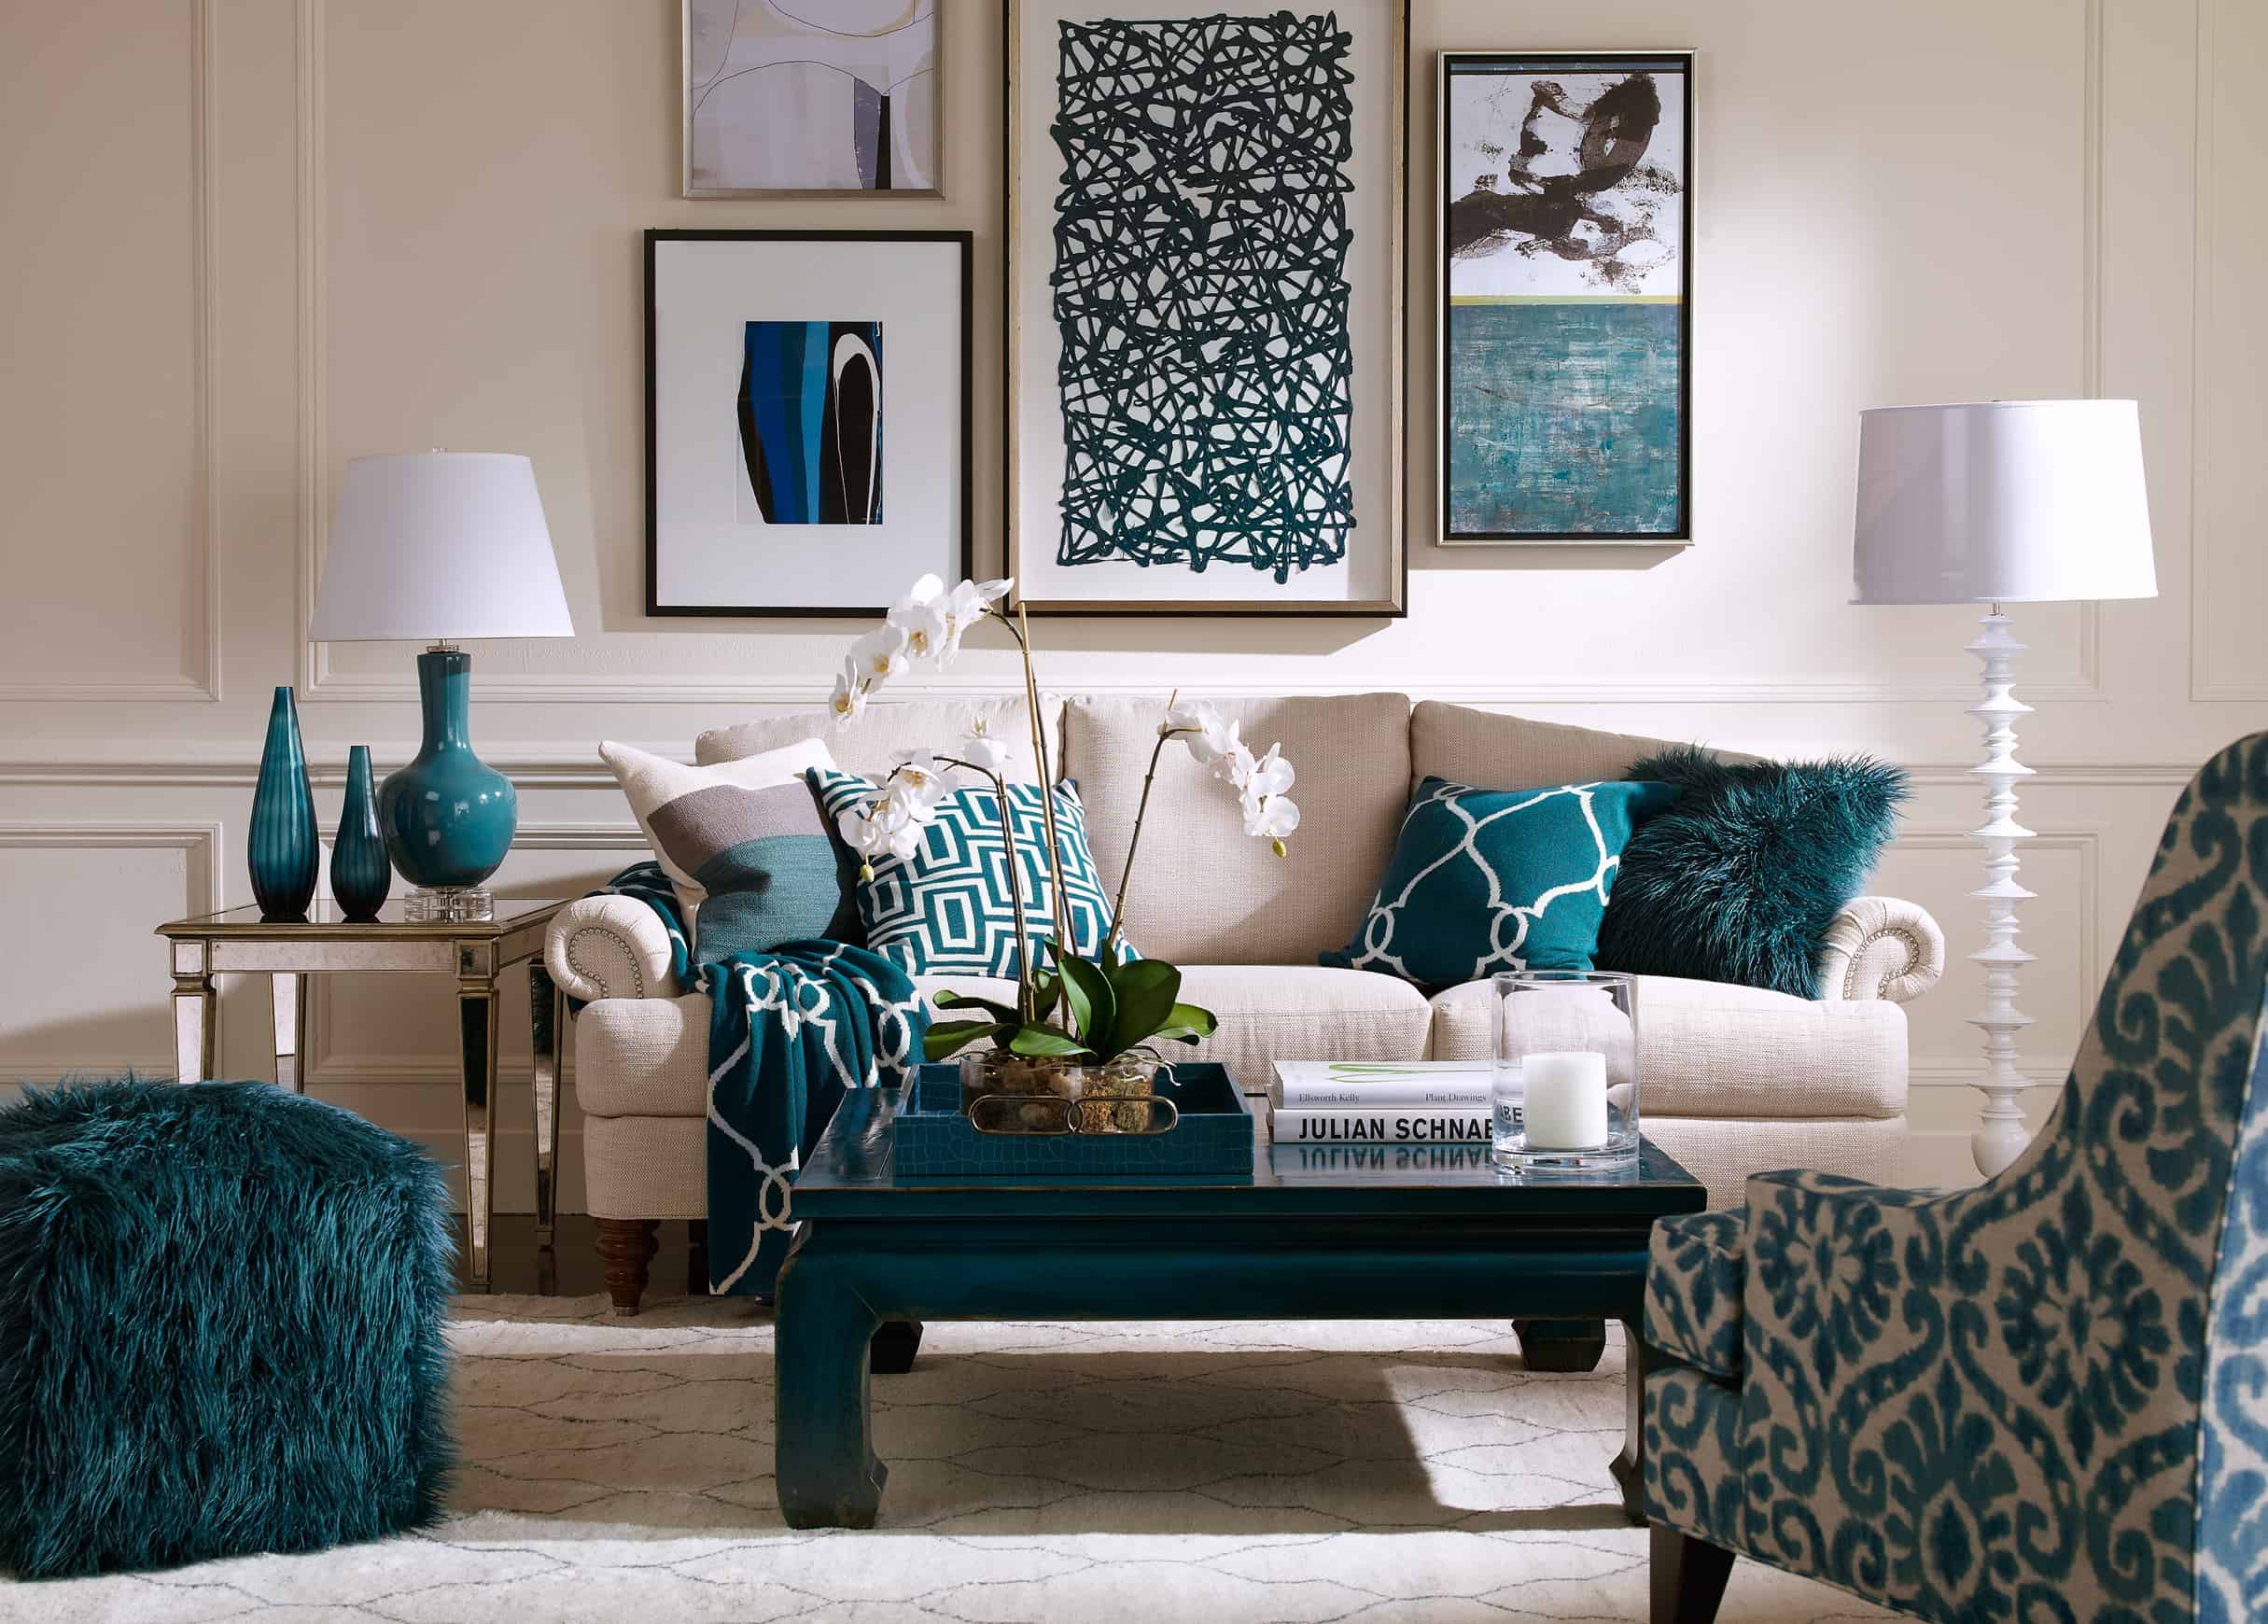 15 of the Best Living Room Decorating Ideas For Any Home